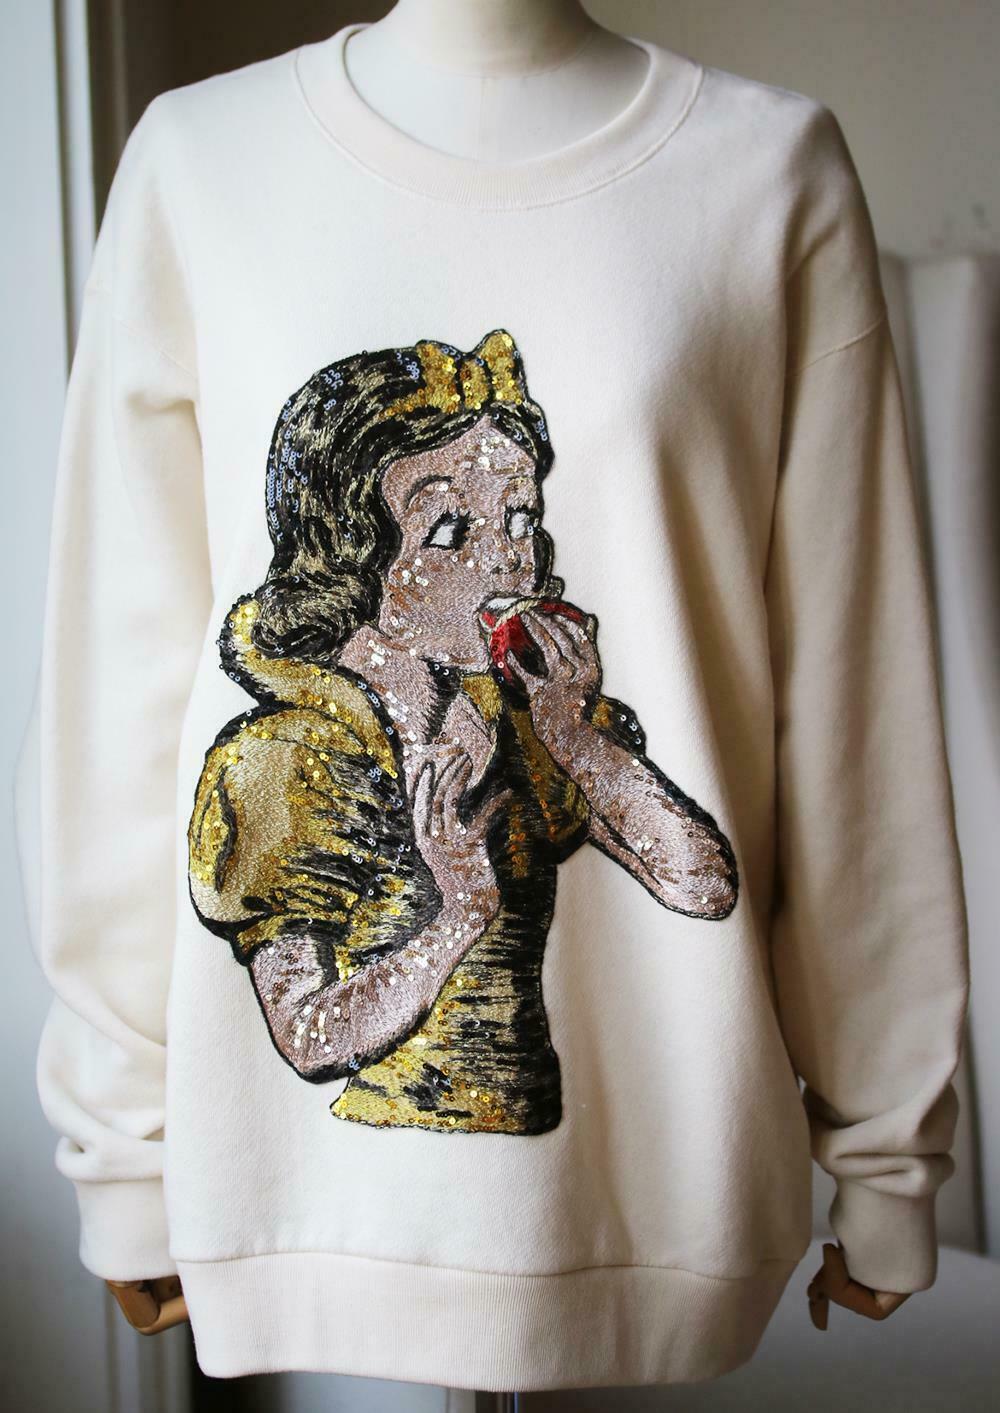 Disney character snow white is inlaid on the front of this sweater and embellished with iridescent sequins. Gucci logo on the back. Sequin embroidered cream cotton jumper with sequin embroidery. 100% Cotton.

Size: Medium (UK 10, US 6, FR 38, IT